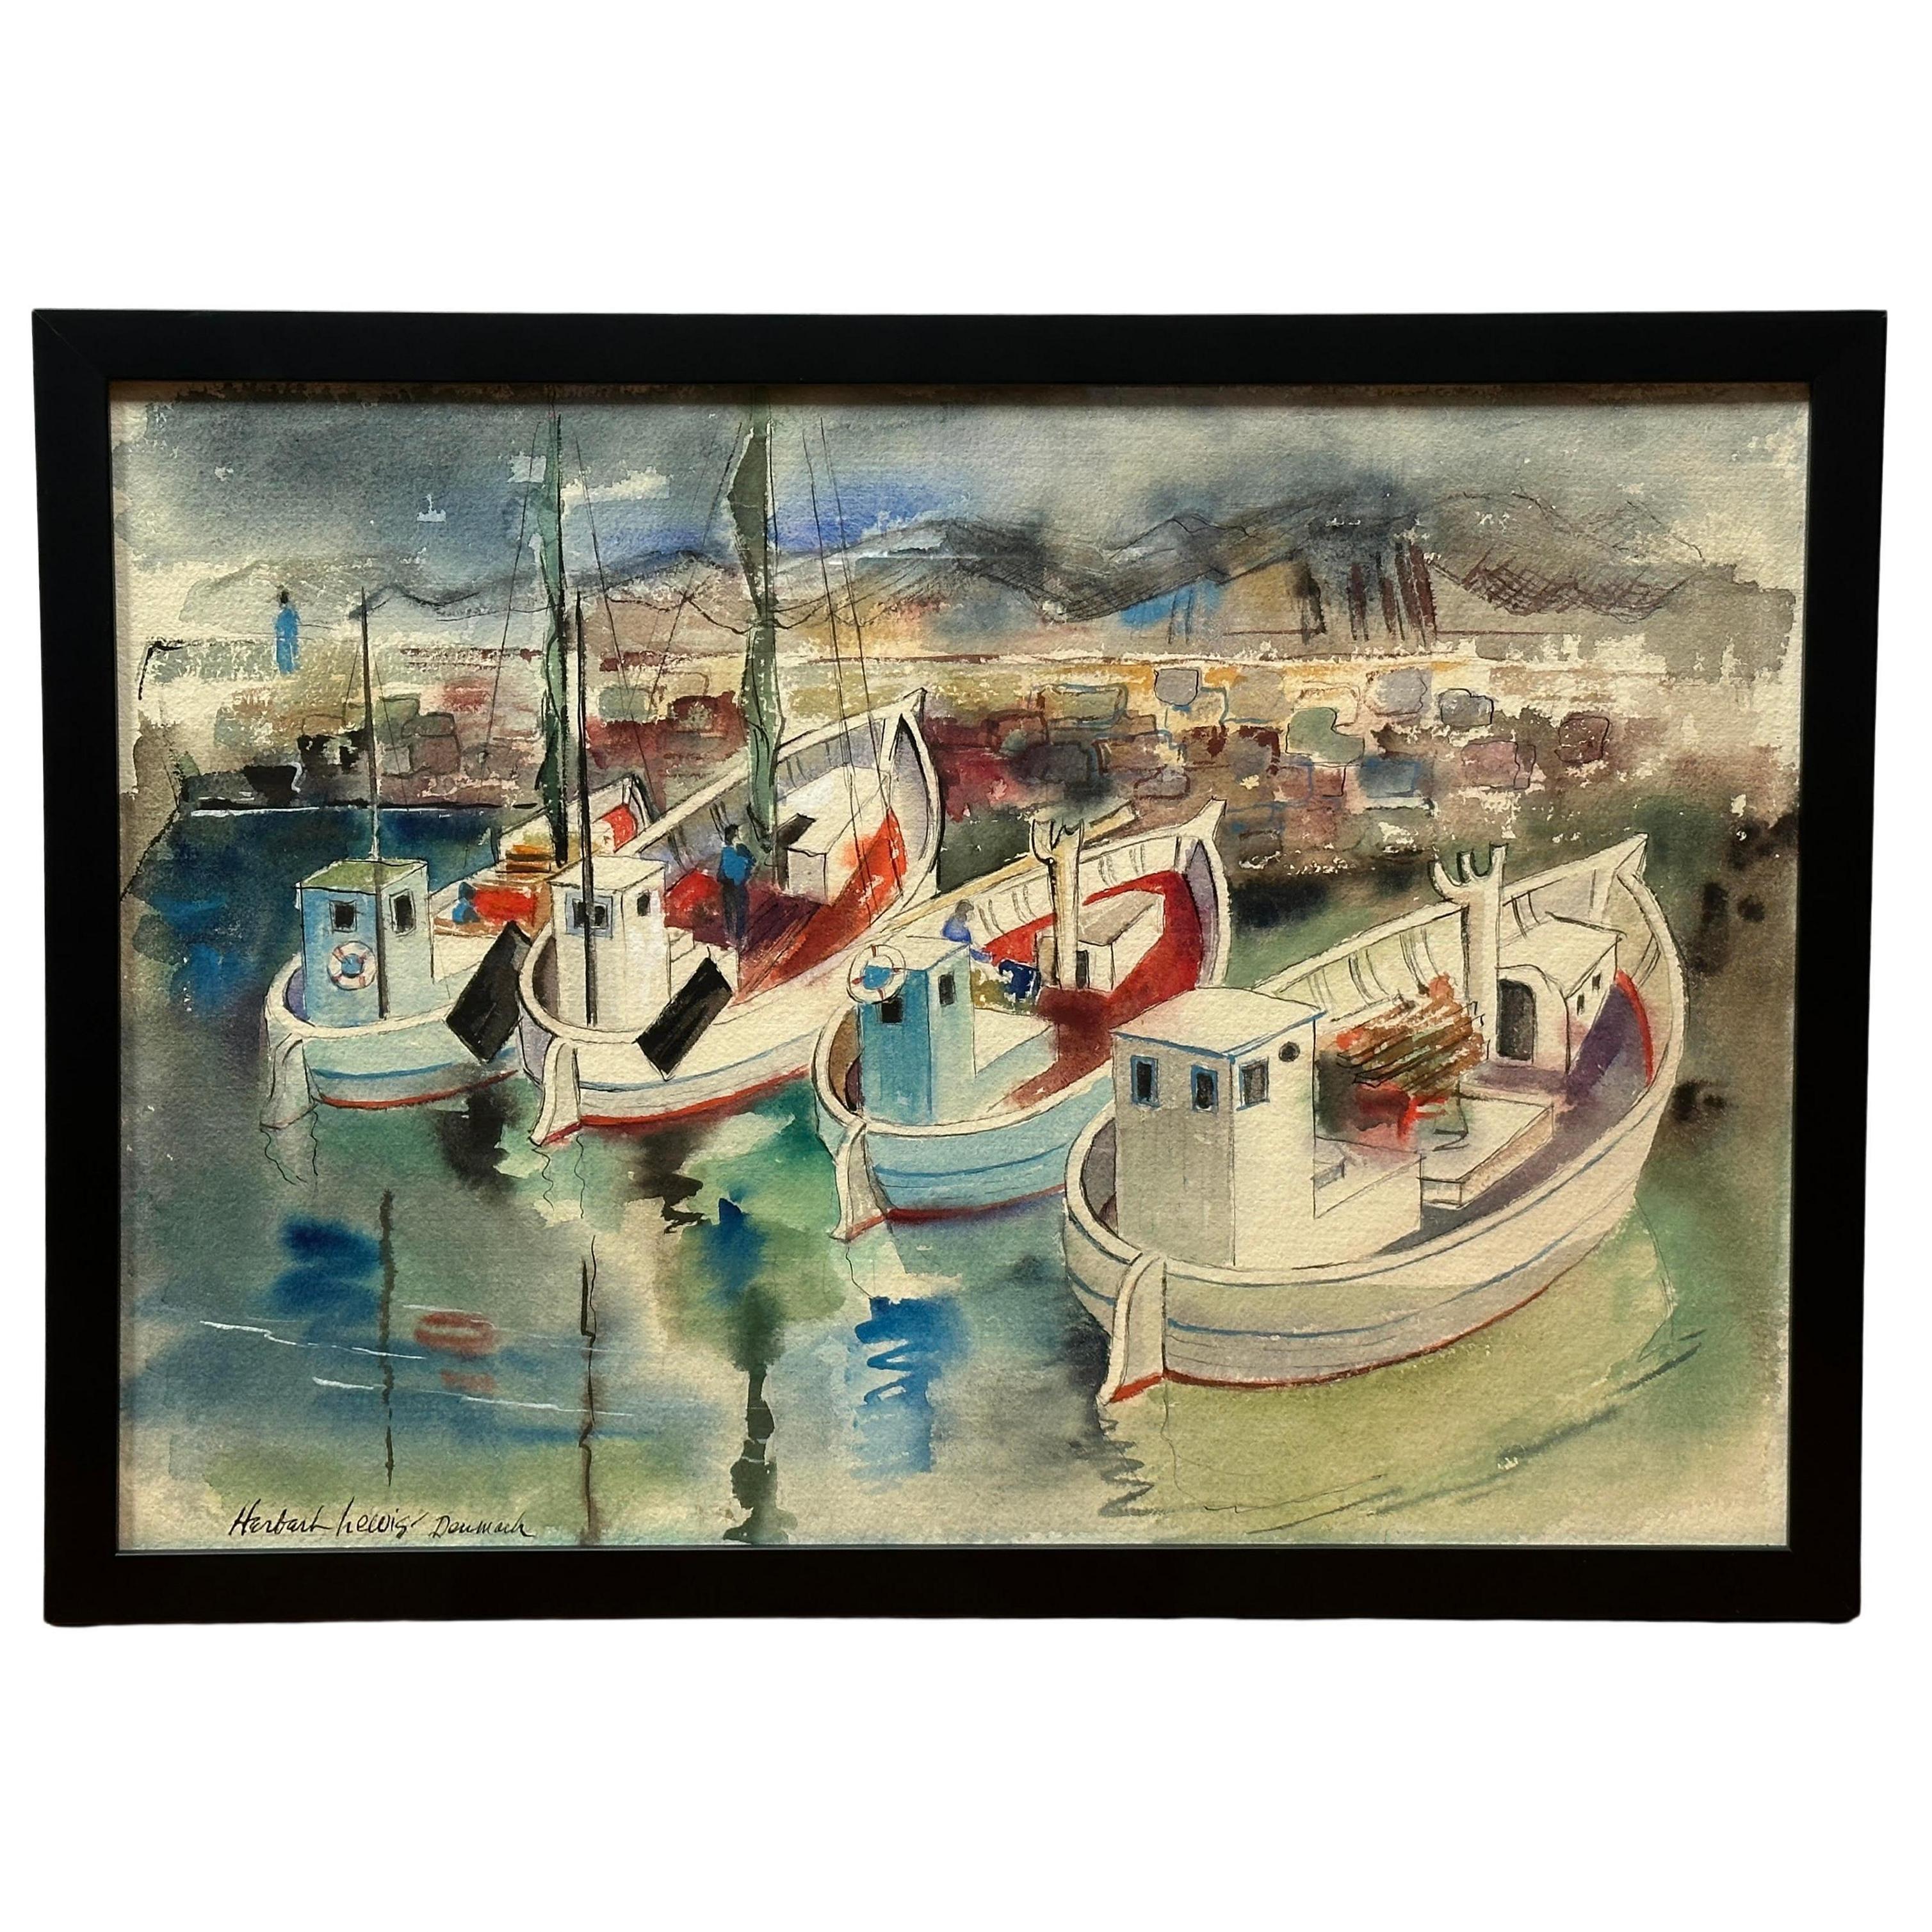 “Denmark” is a watercolor painting by Herbert Lewins capturing the serene beauty of a Danish harbor, featuring four charming boats that resemble traditional fisherman's vessels. The artist's skillful use of soft hues, highlighted by touches of red,